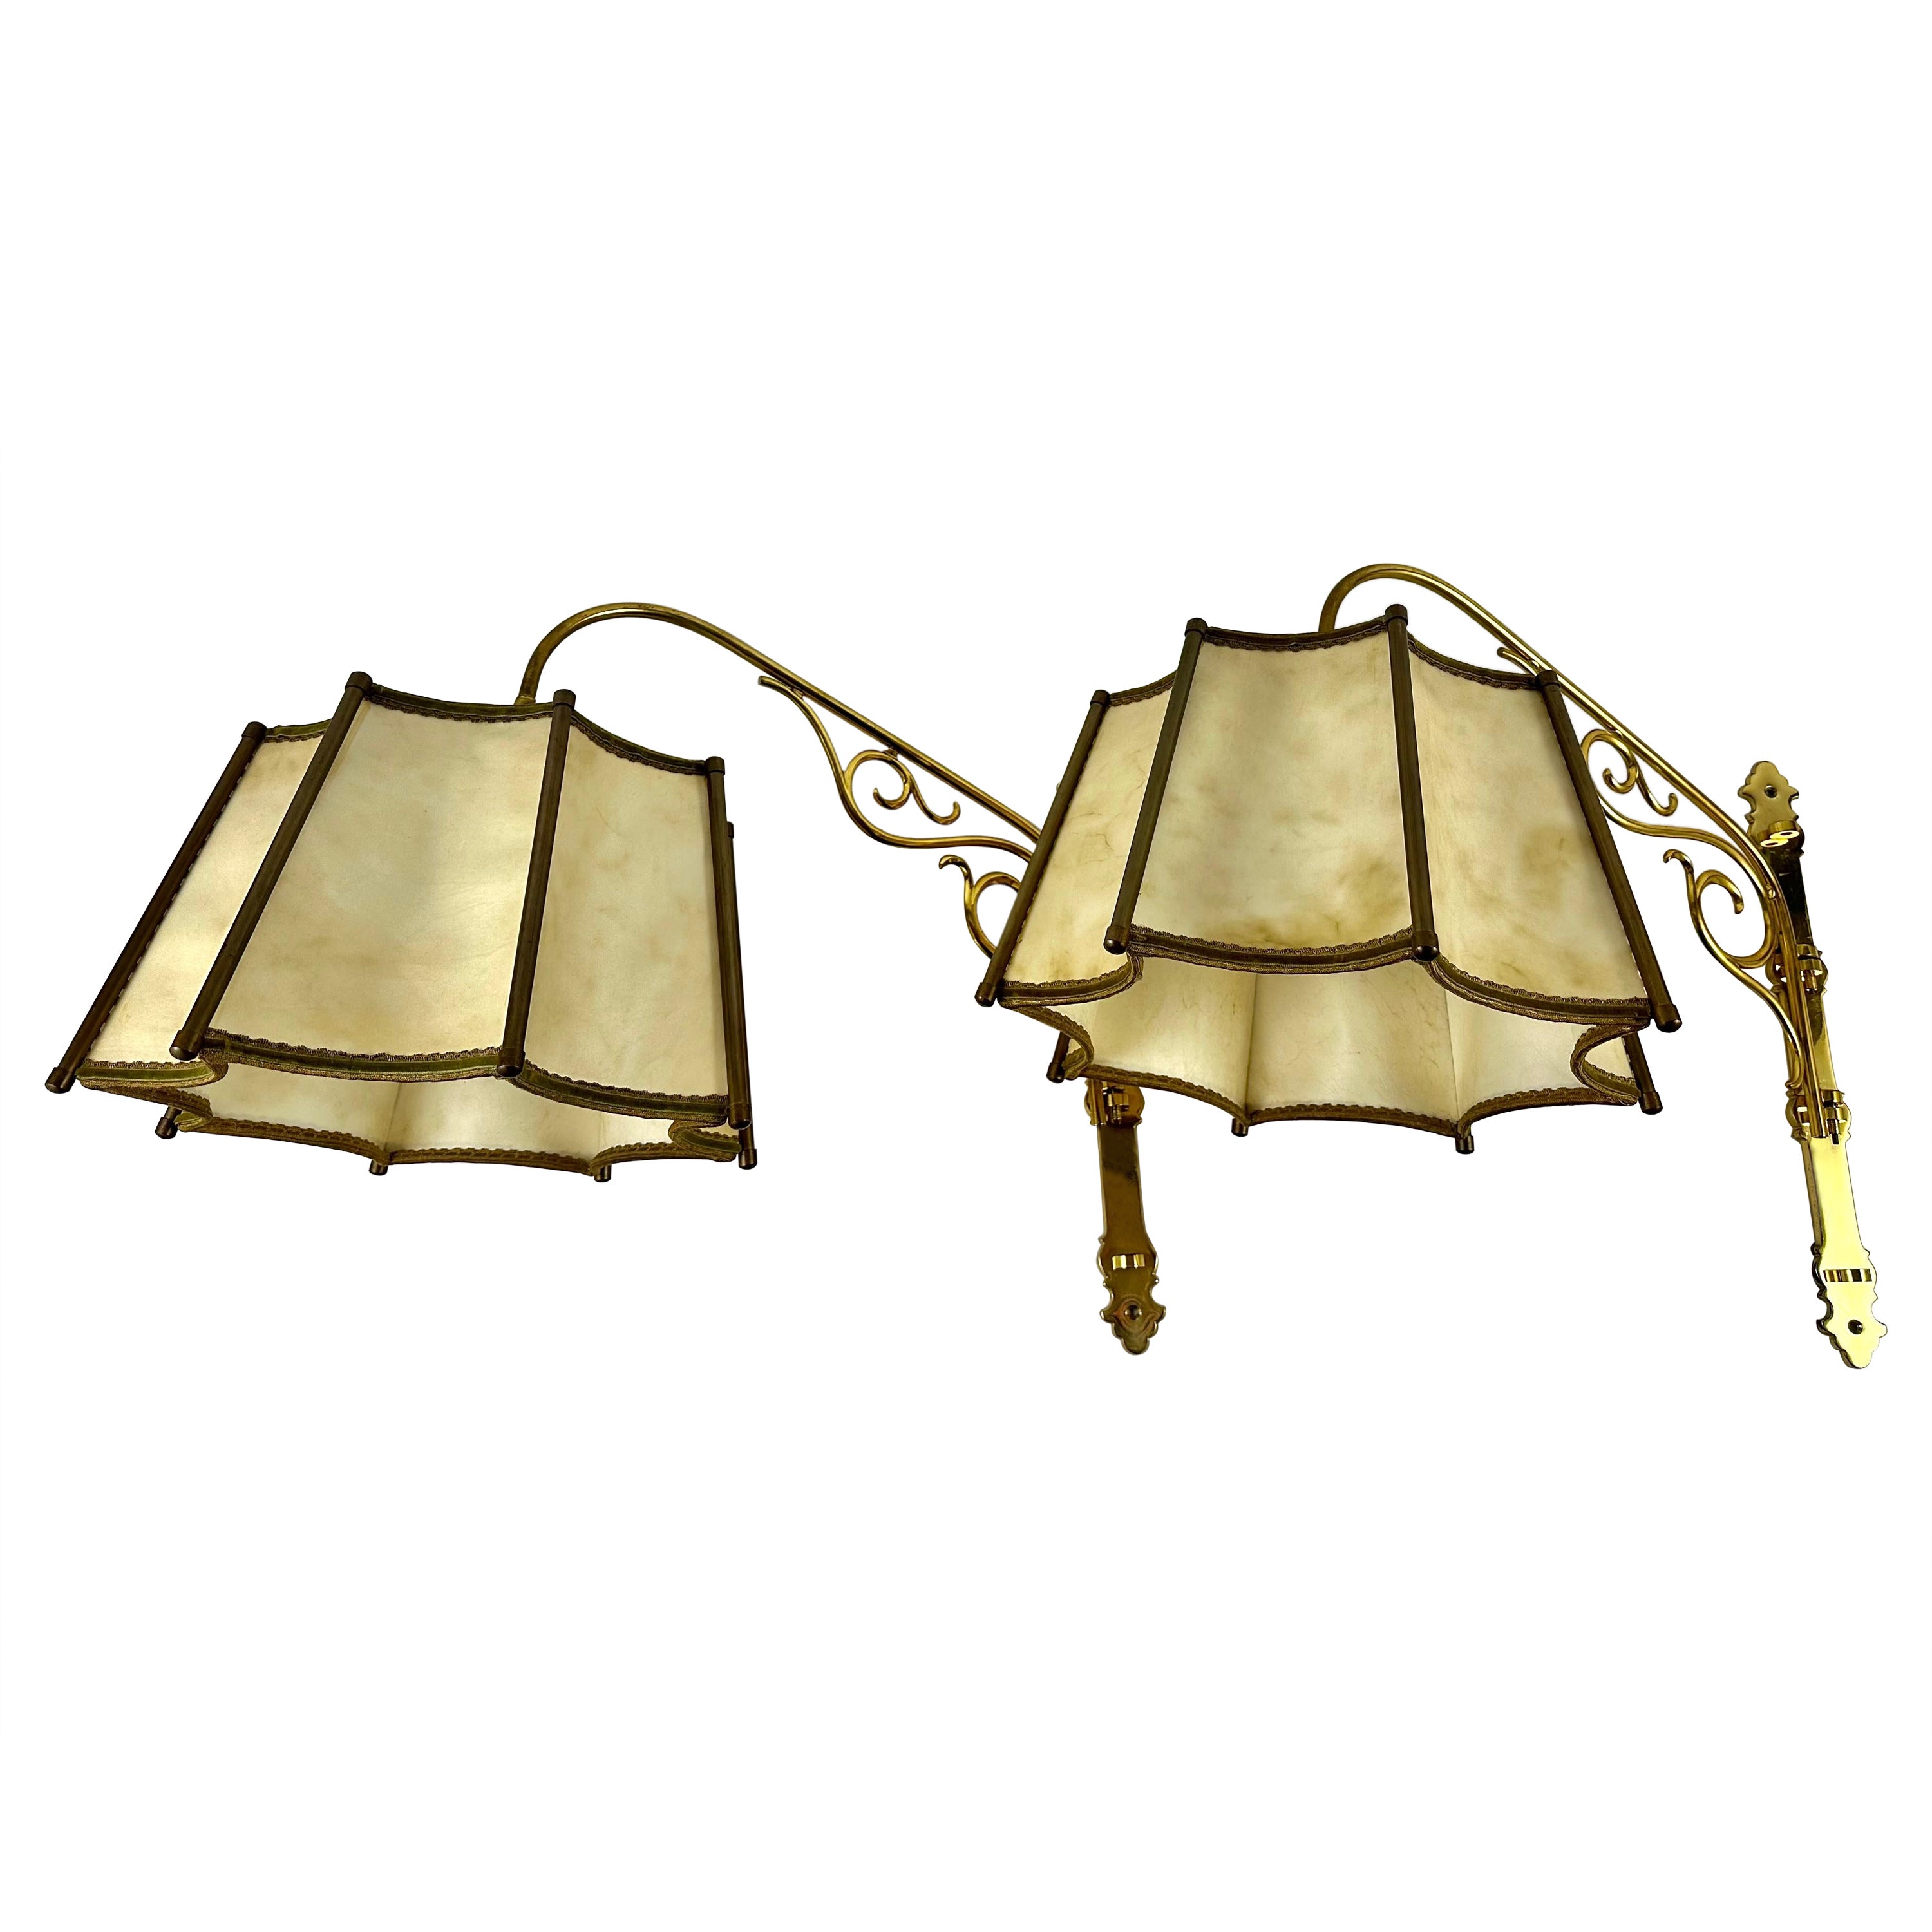 Vintage Wall Sconces With Leather Shade Bedside Lighting, Set 2, Germany, 1950s For Sale